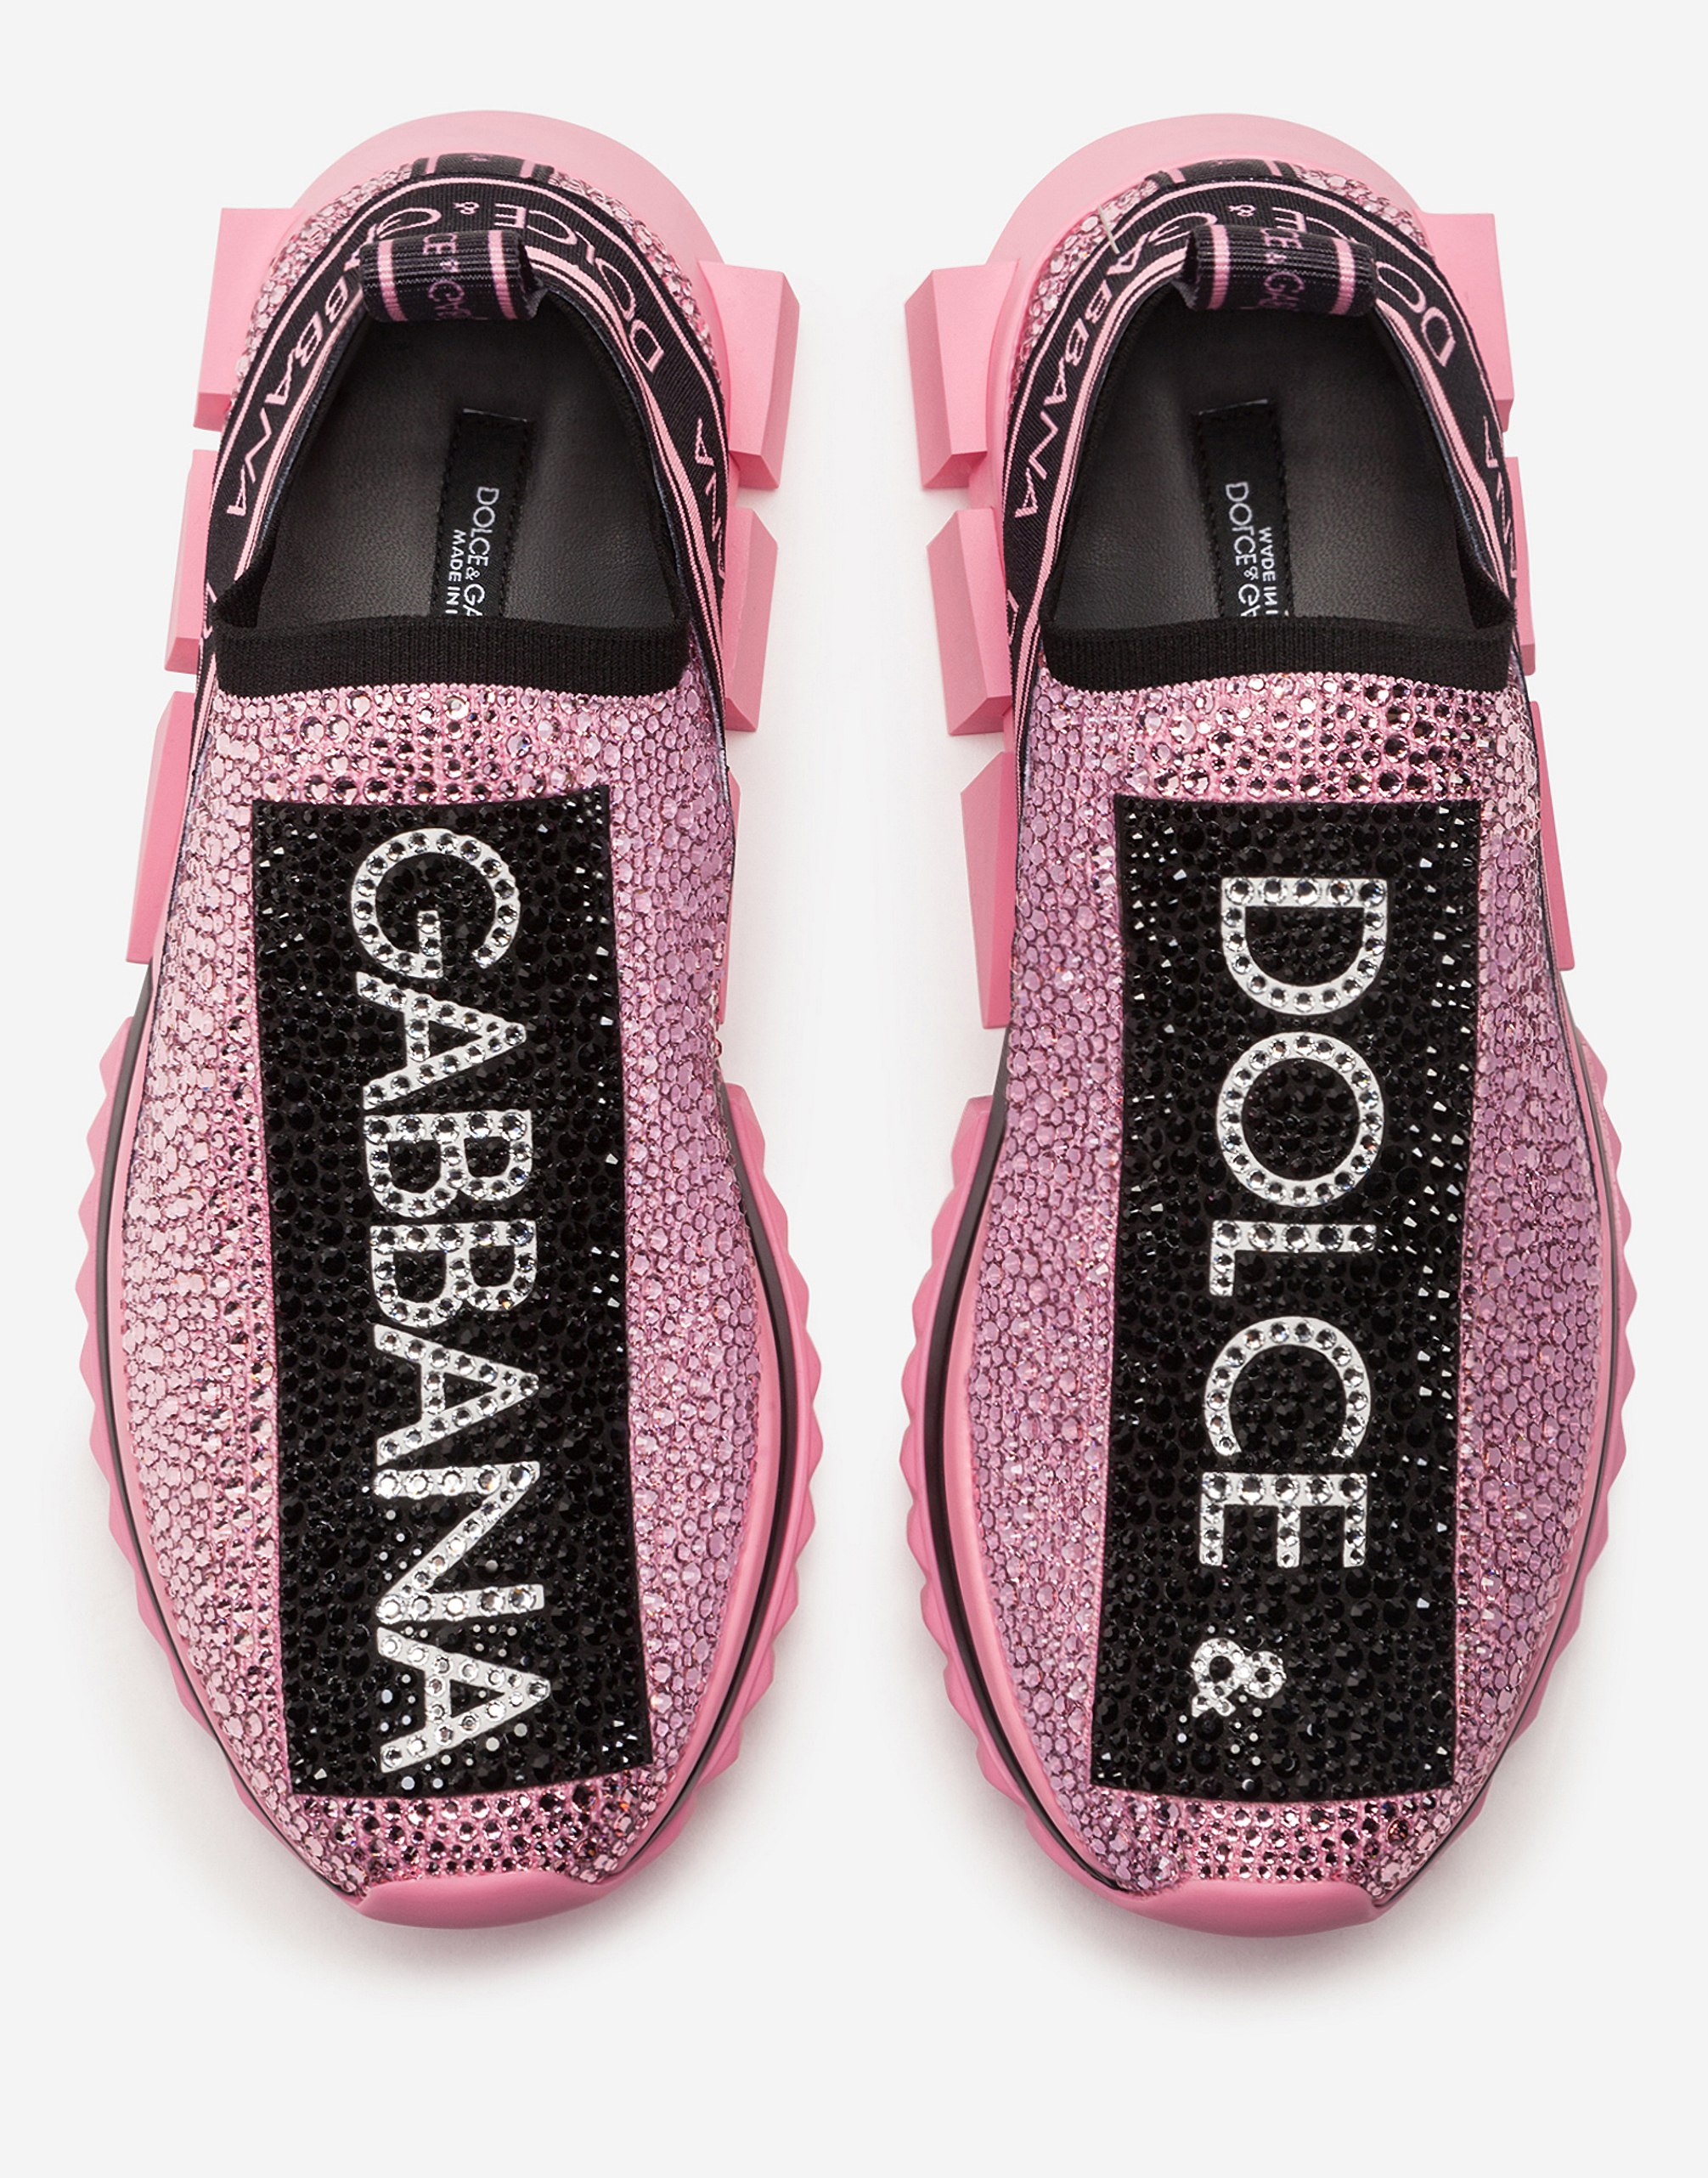 dolce and gabbana children's shoes